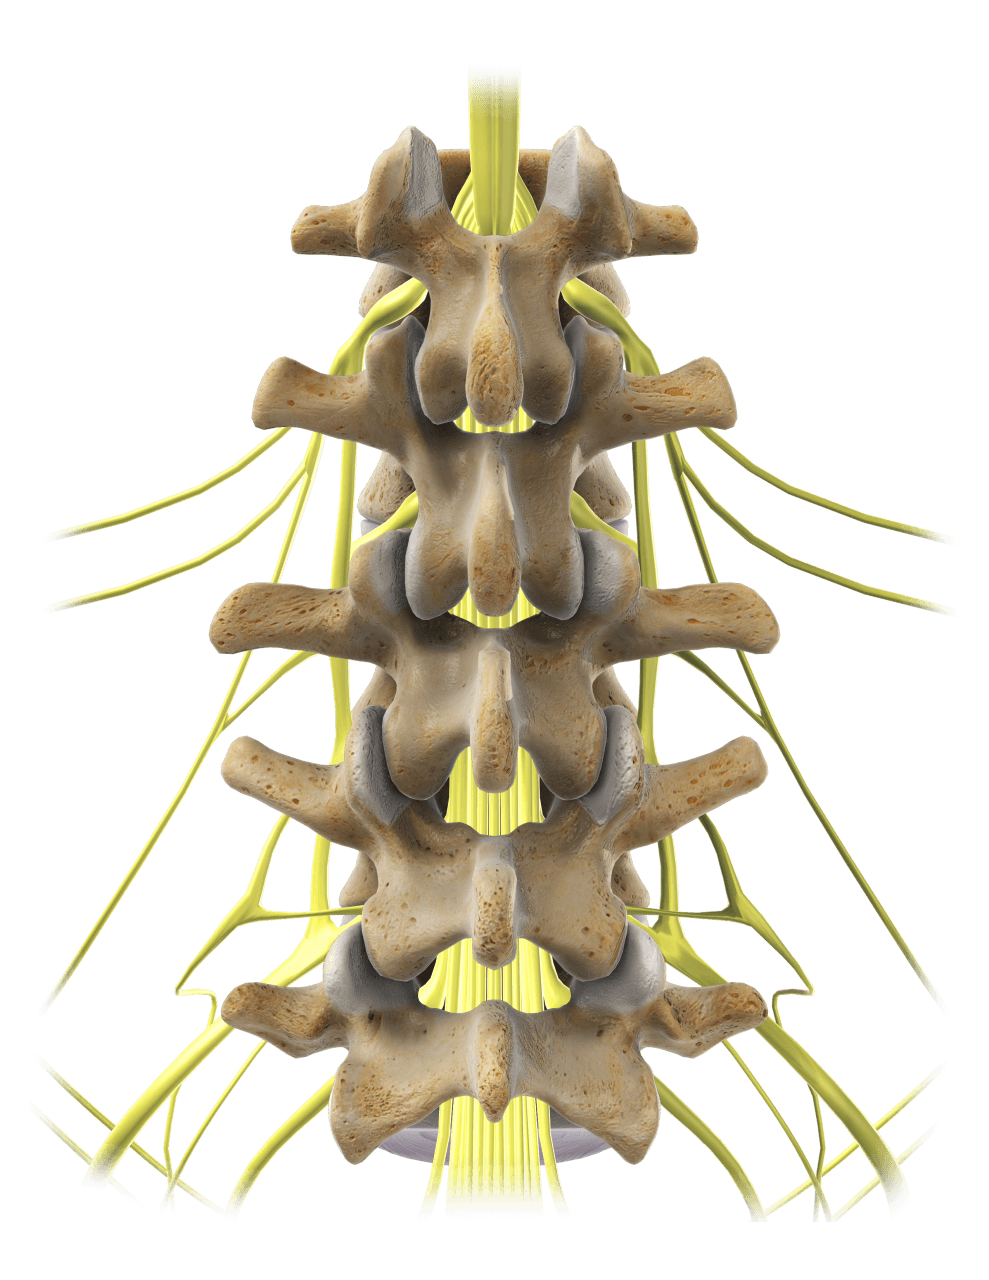 Closeup image of spine and nerve model